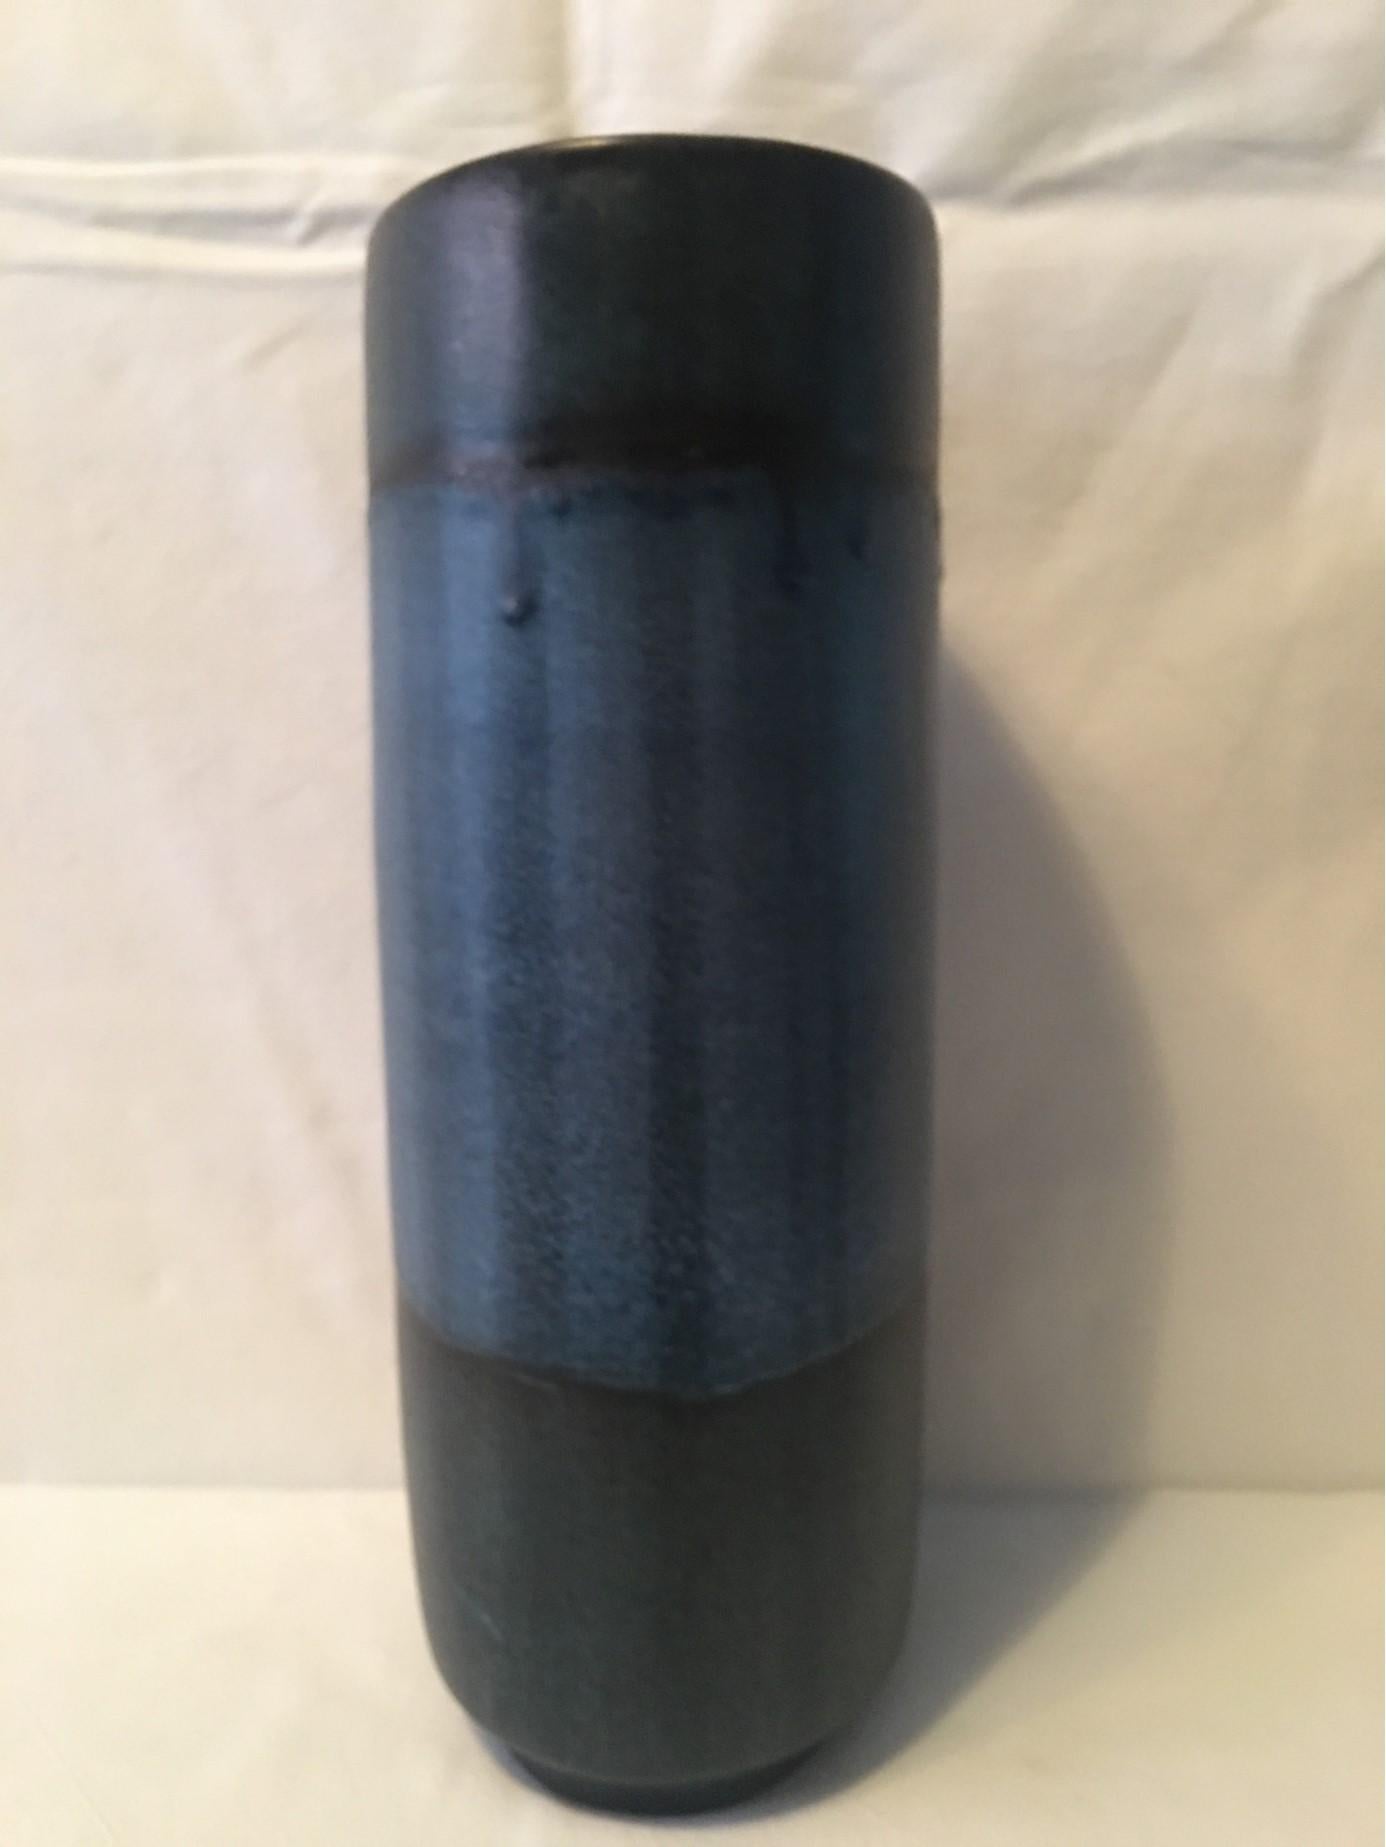 An impressive, beautiful and elegant Vase from the Karlsruhe Majolika created by the ceramic artist Fridegart Glatzle between 1962 and 1964. In 1959 Ms. Glatzle was awarded the prestigious state price for ceramic handcraft from her home state. This